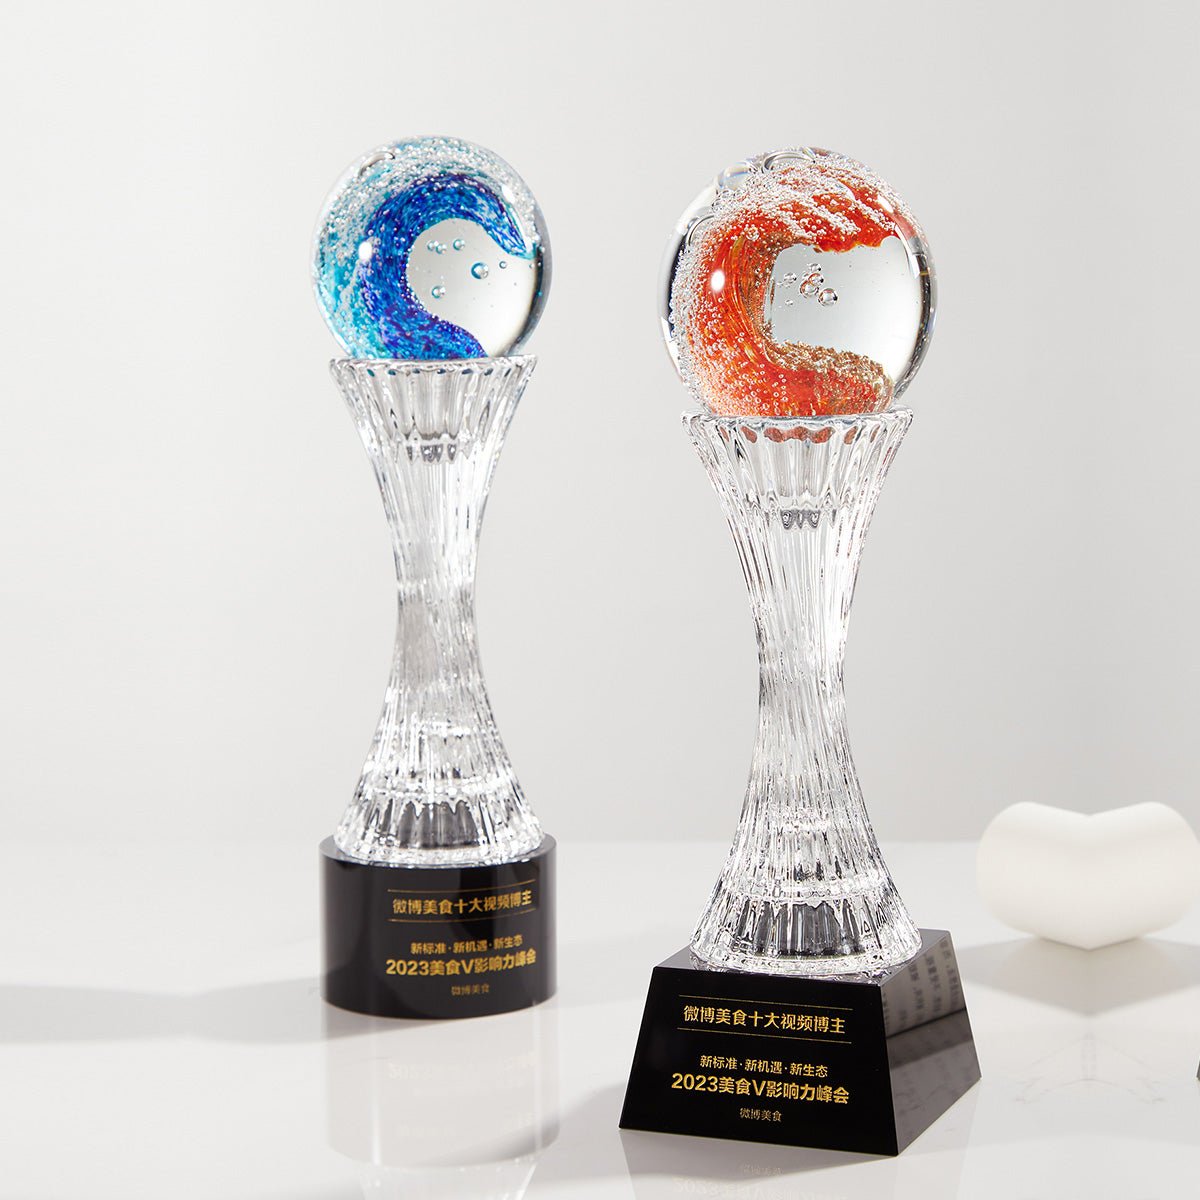 3D Engraving Customized Crystal Trophy Award Lustrous Glass Ball Square Round Black Base Red Blue Yellow Trophy/Award Prismuse   